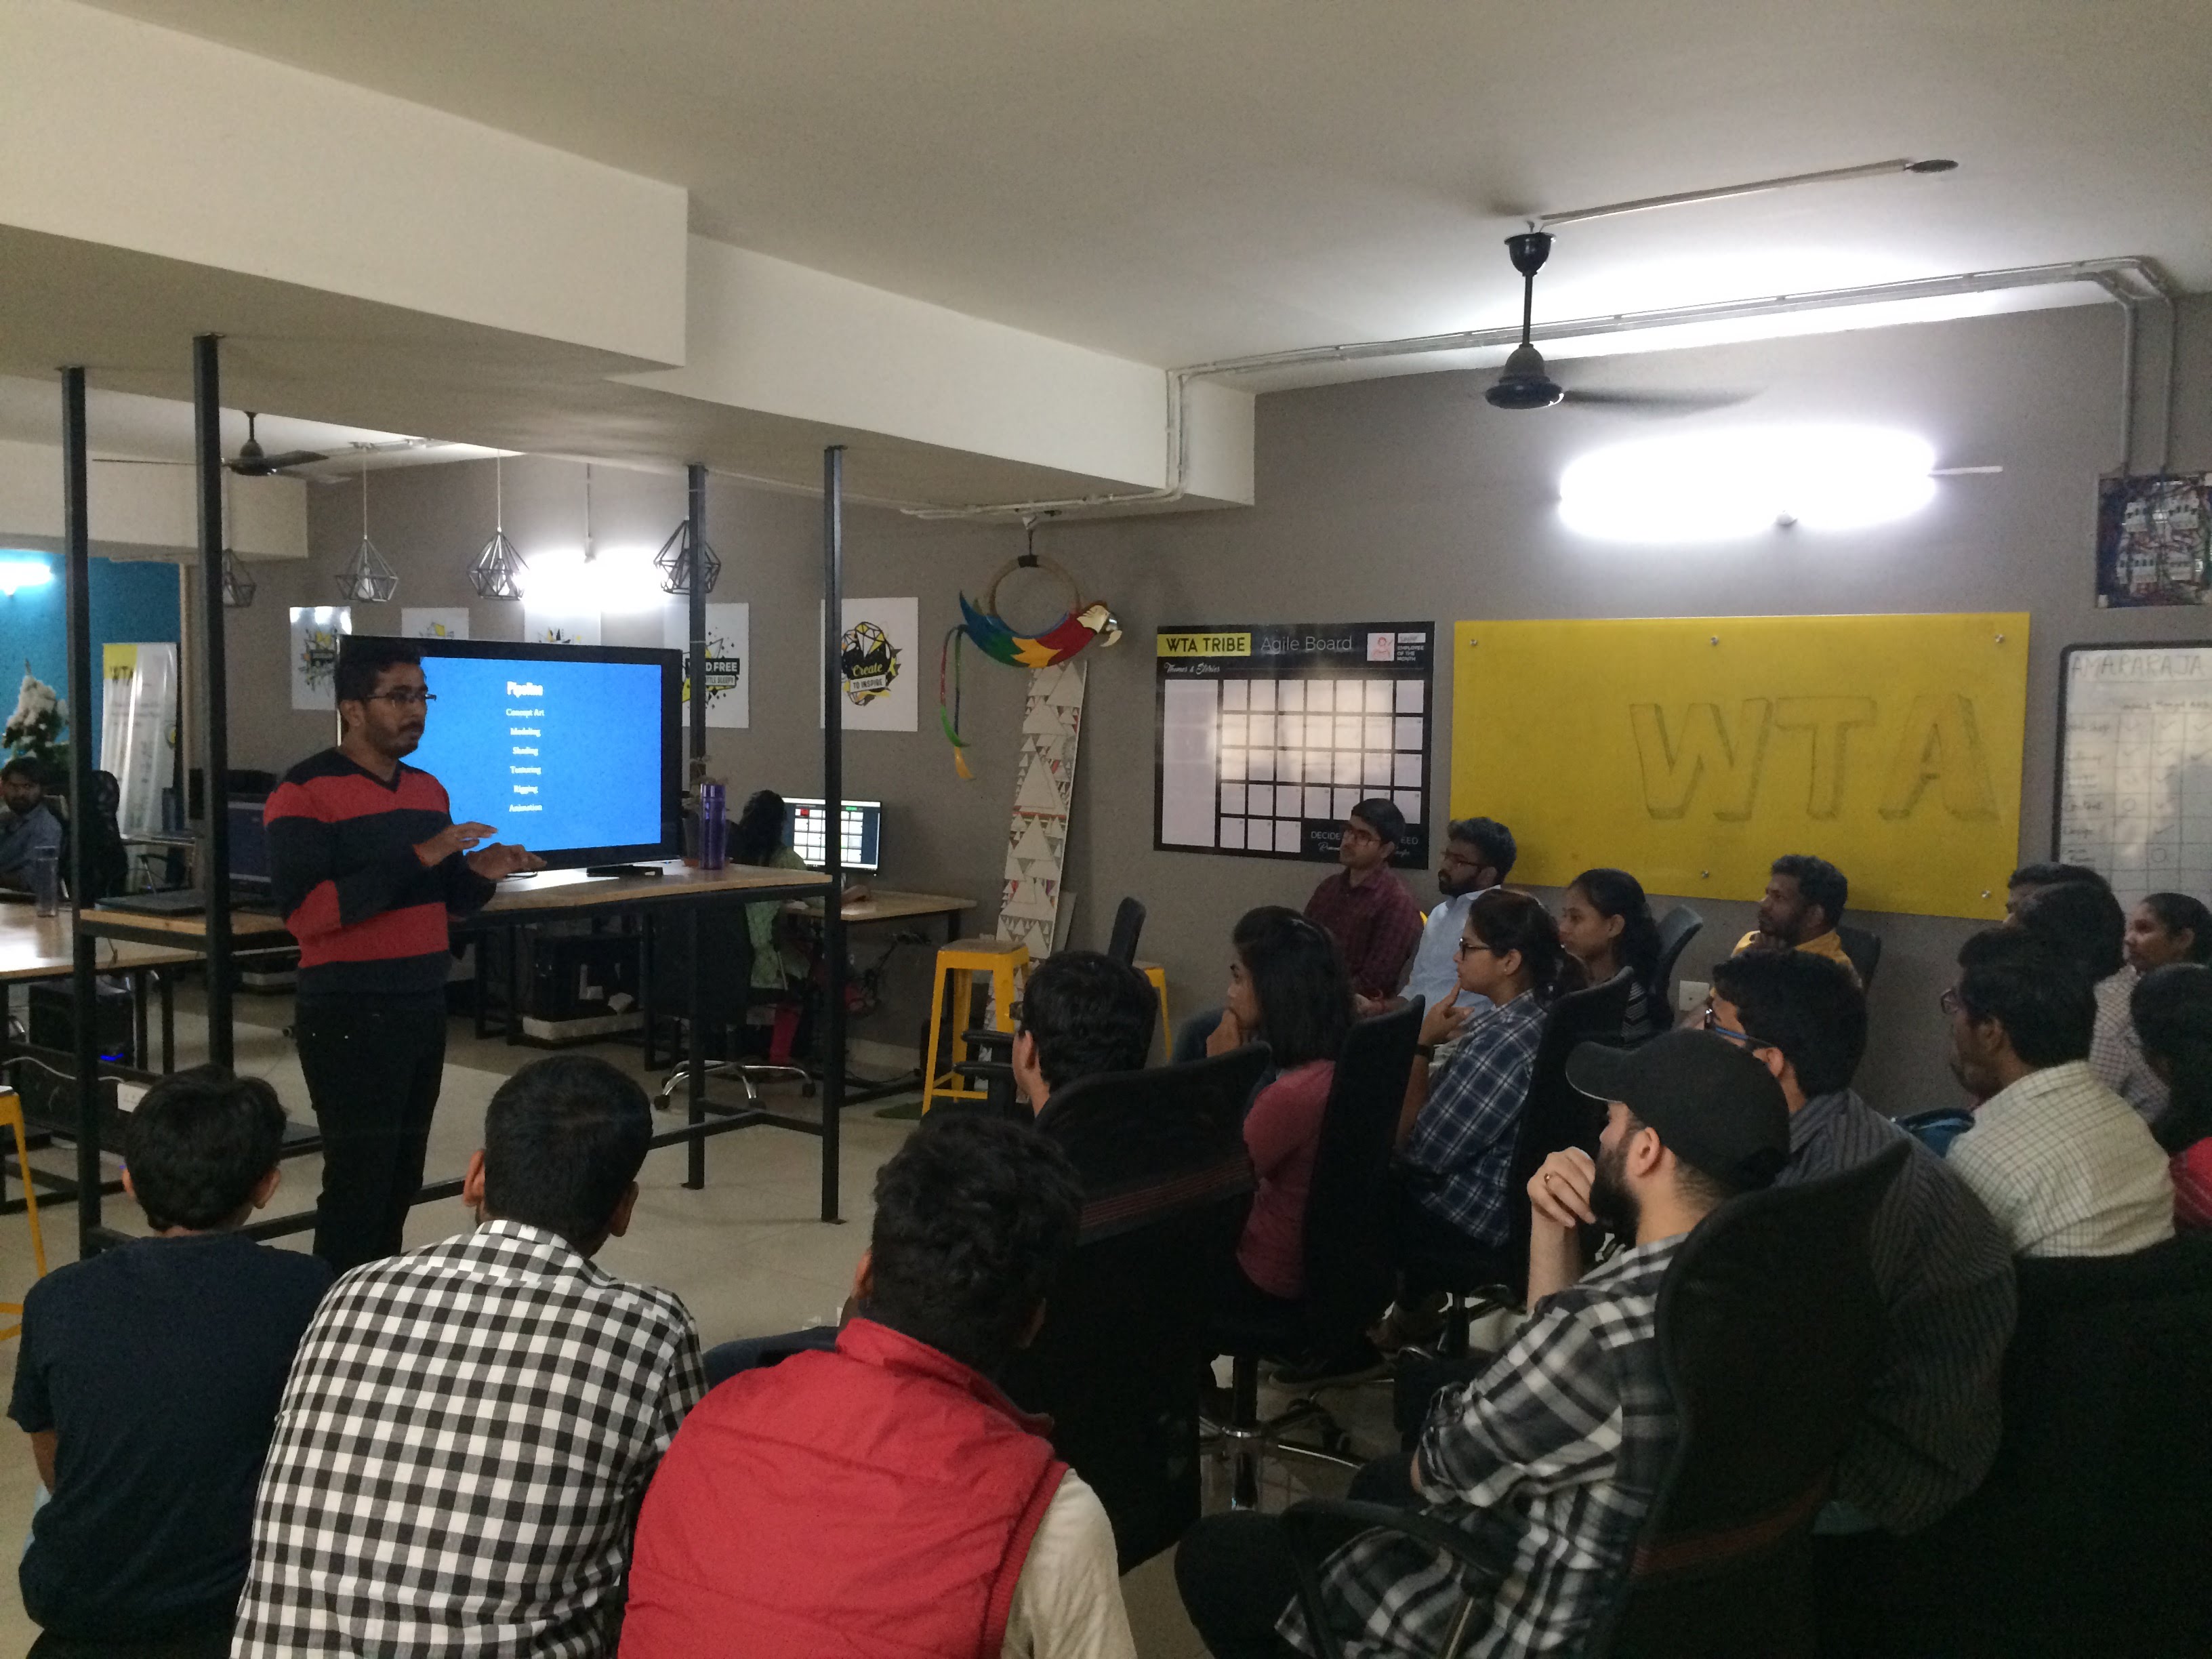 BonfireVR successfully conducts its third Meet-up -